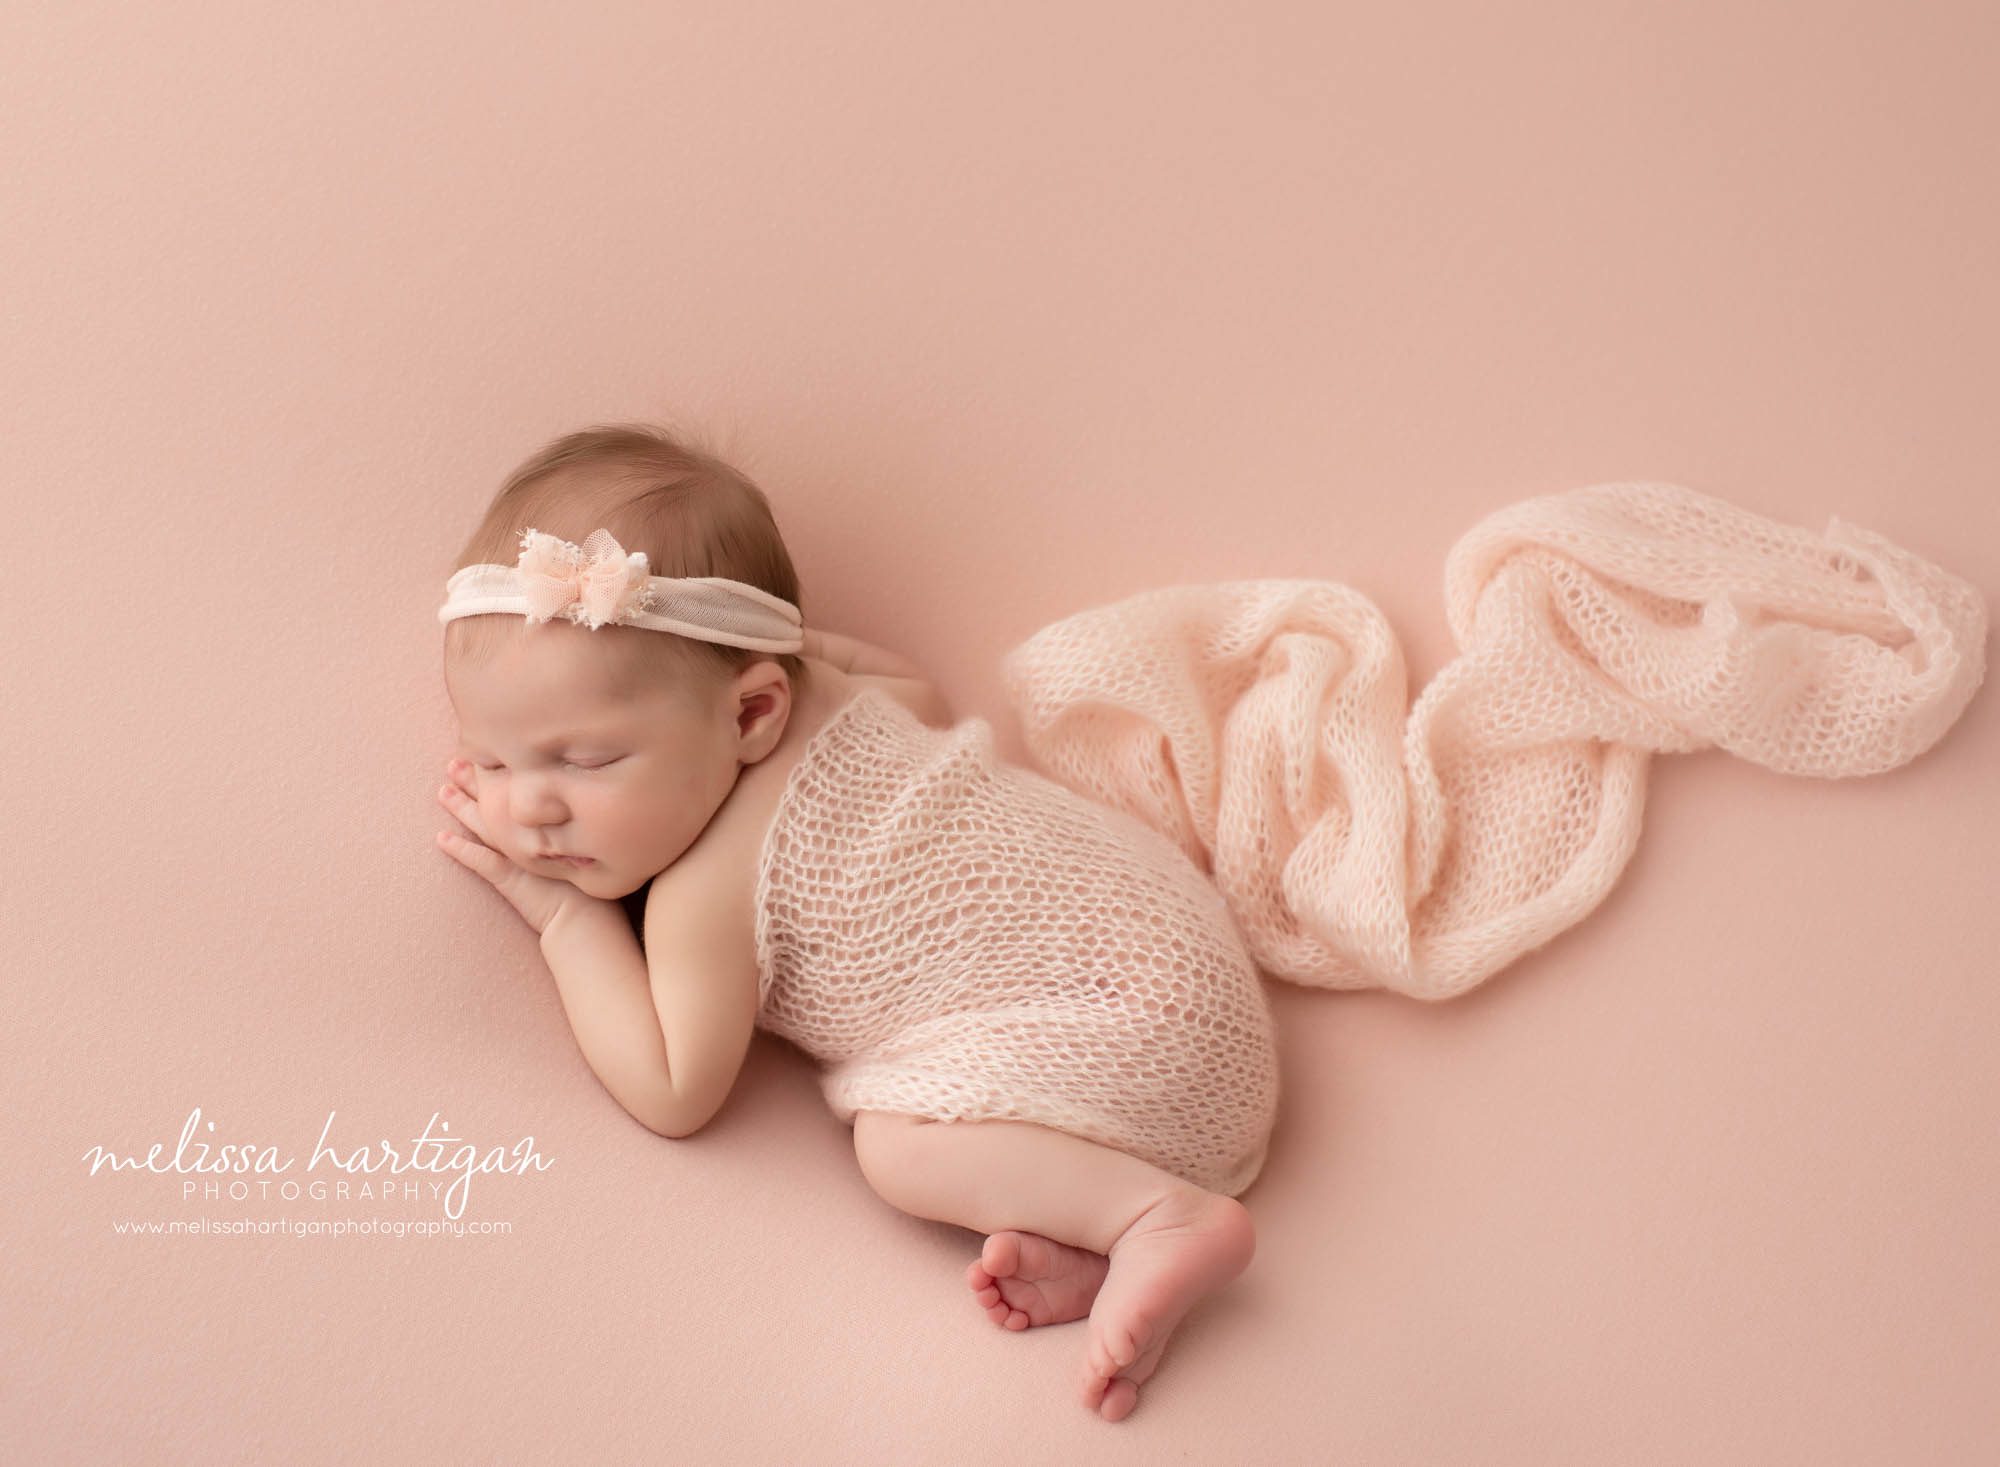 newborn baby girl posed on pink posing fabric with light pink knitted wrap and pink bow headband